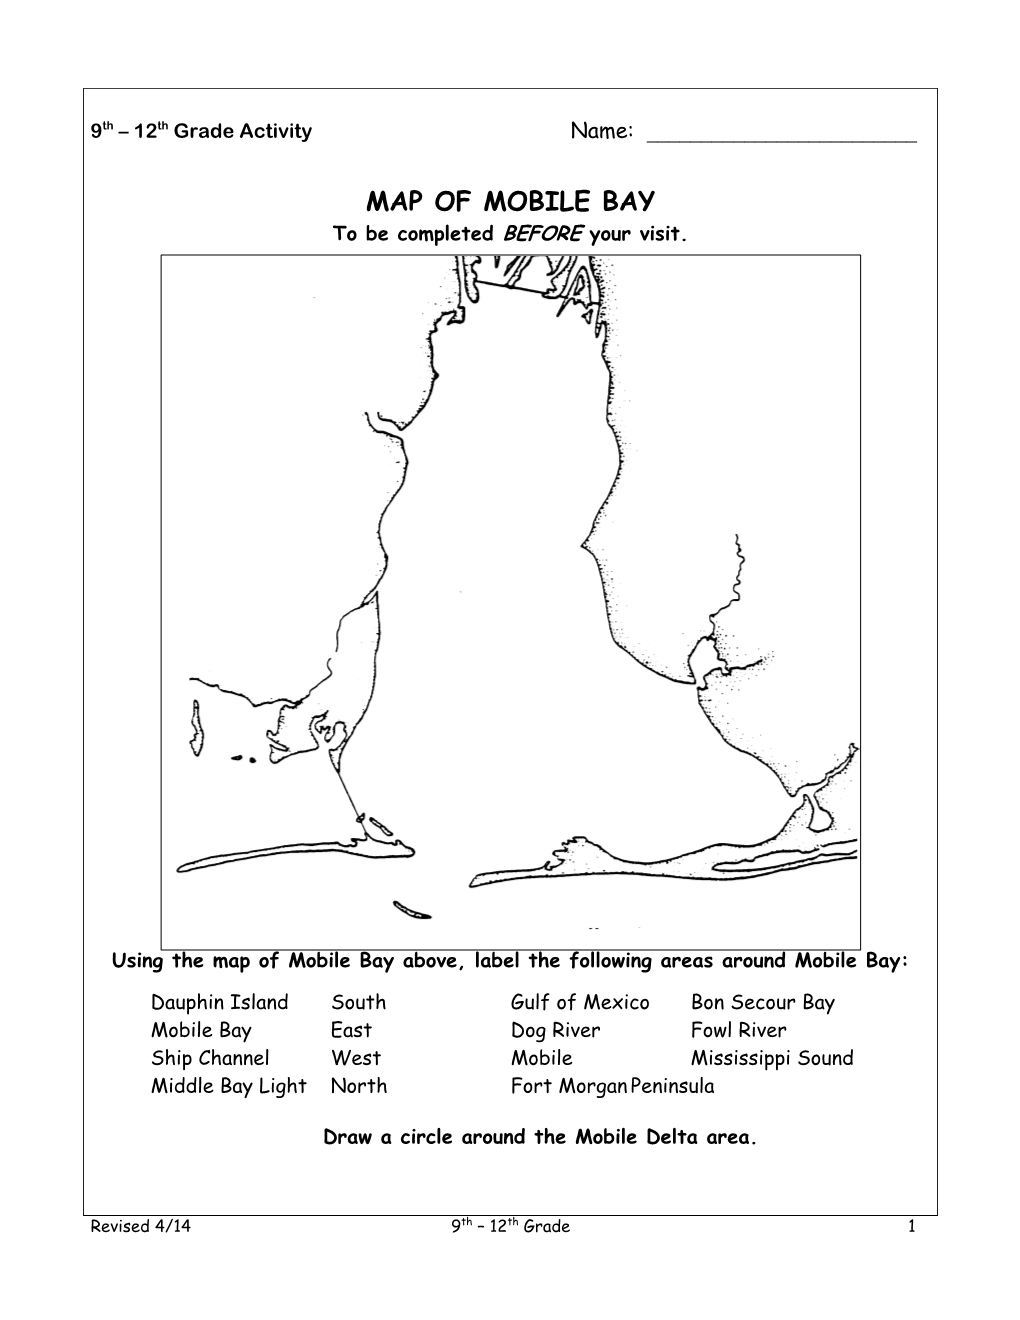 MAP of MOBILE BAY to Be Completed BEFORE Your Visit